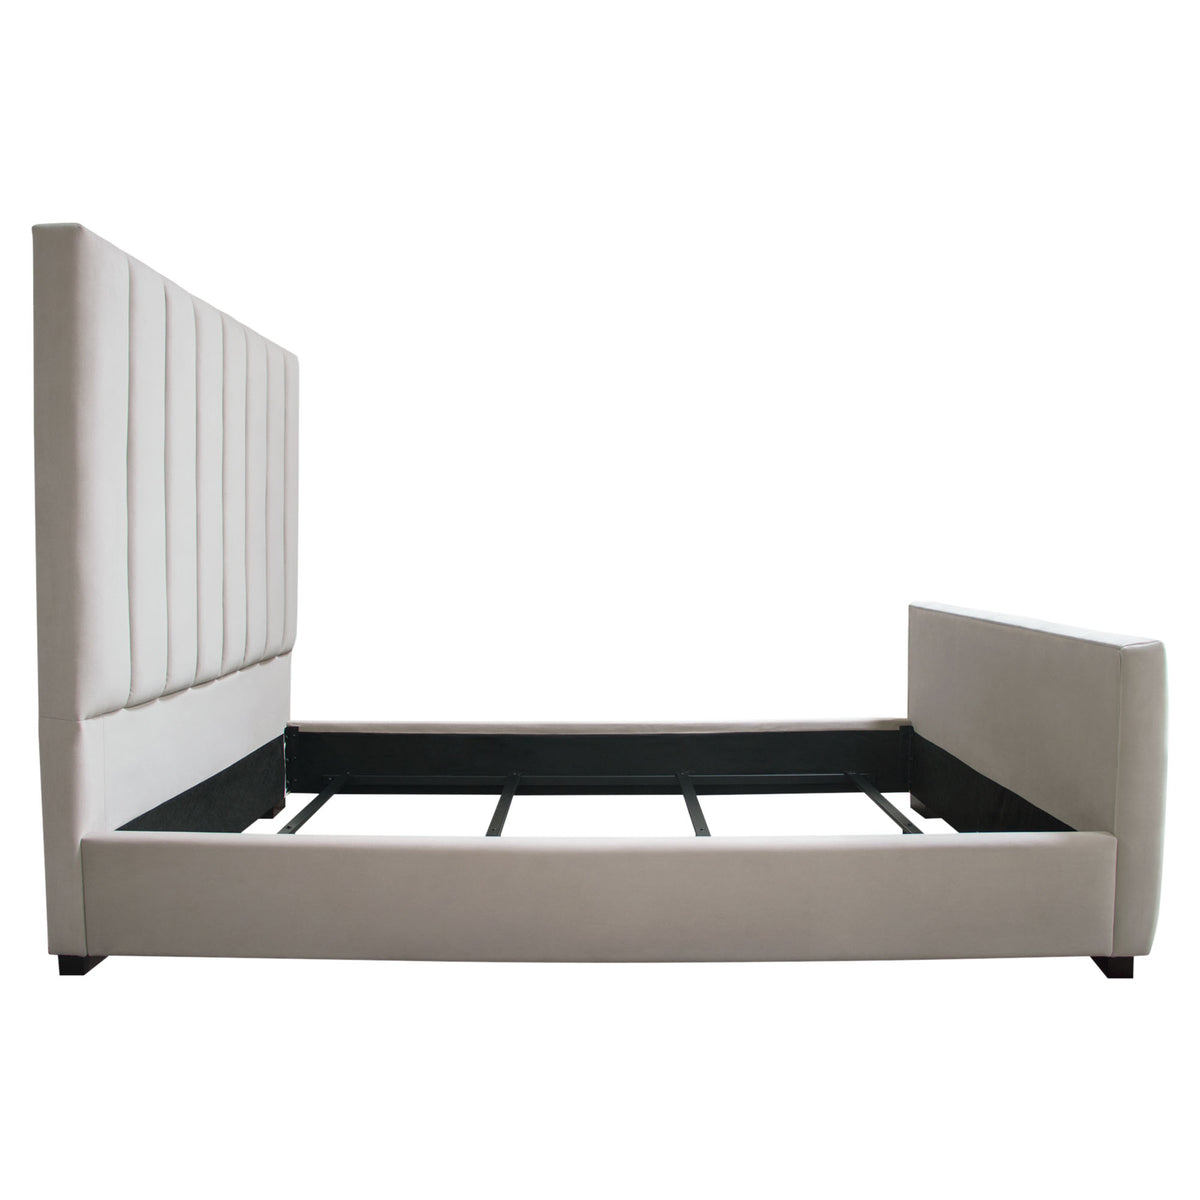 Ophelia Vertical Tufted Light Grey Velvet Bed - Luxury Living Collection